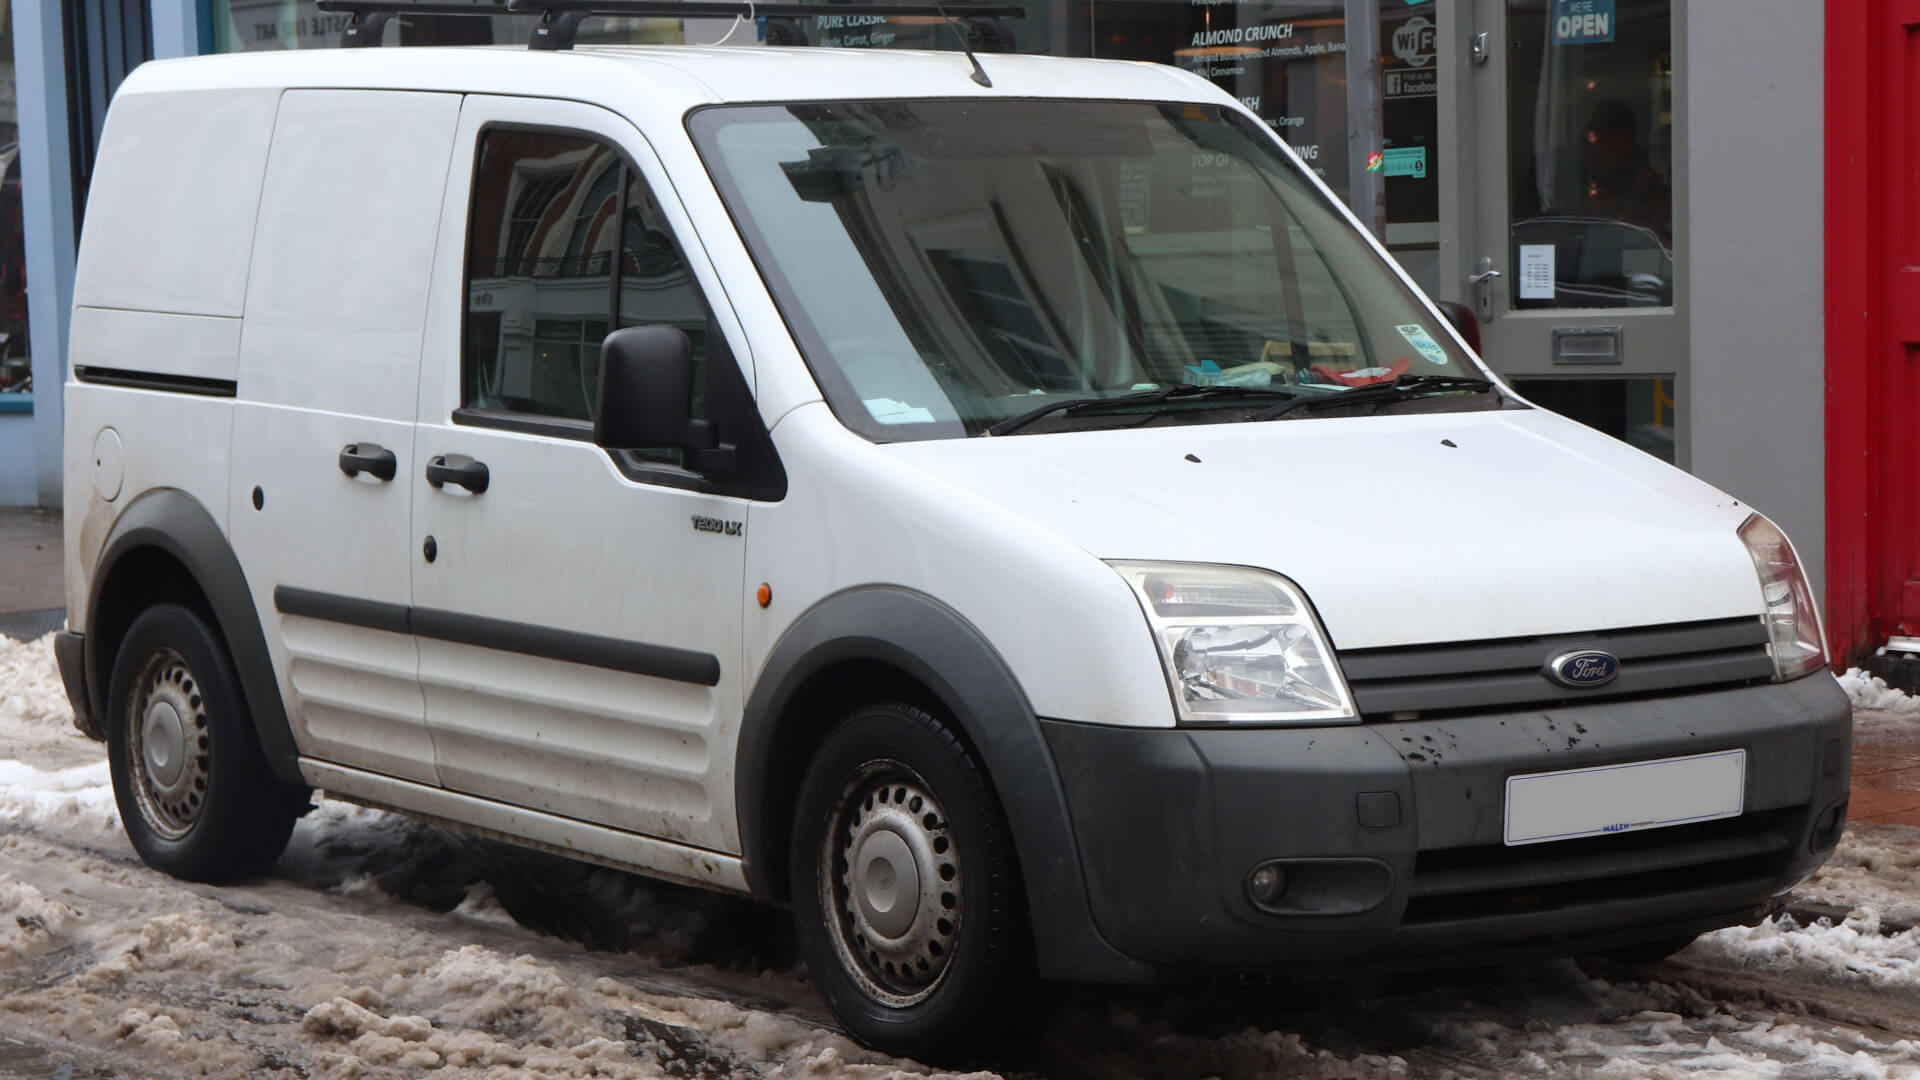 Direct4x4 Accessories for Ford Transit Connect Vehicles